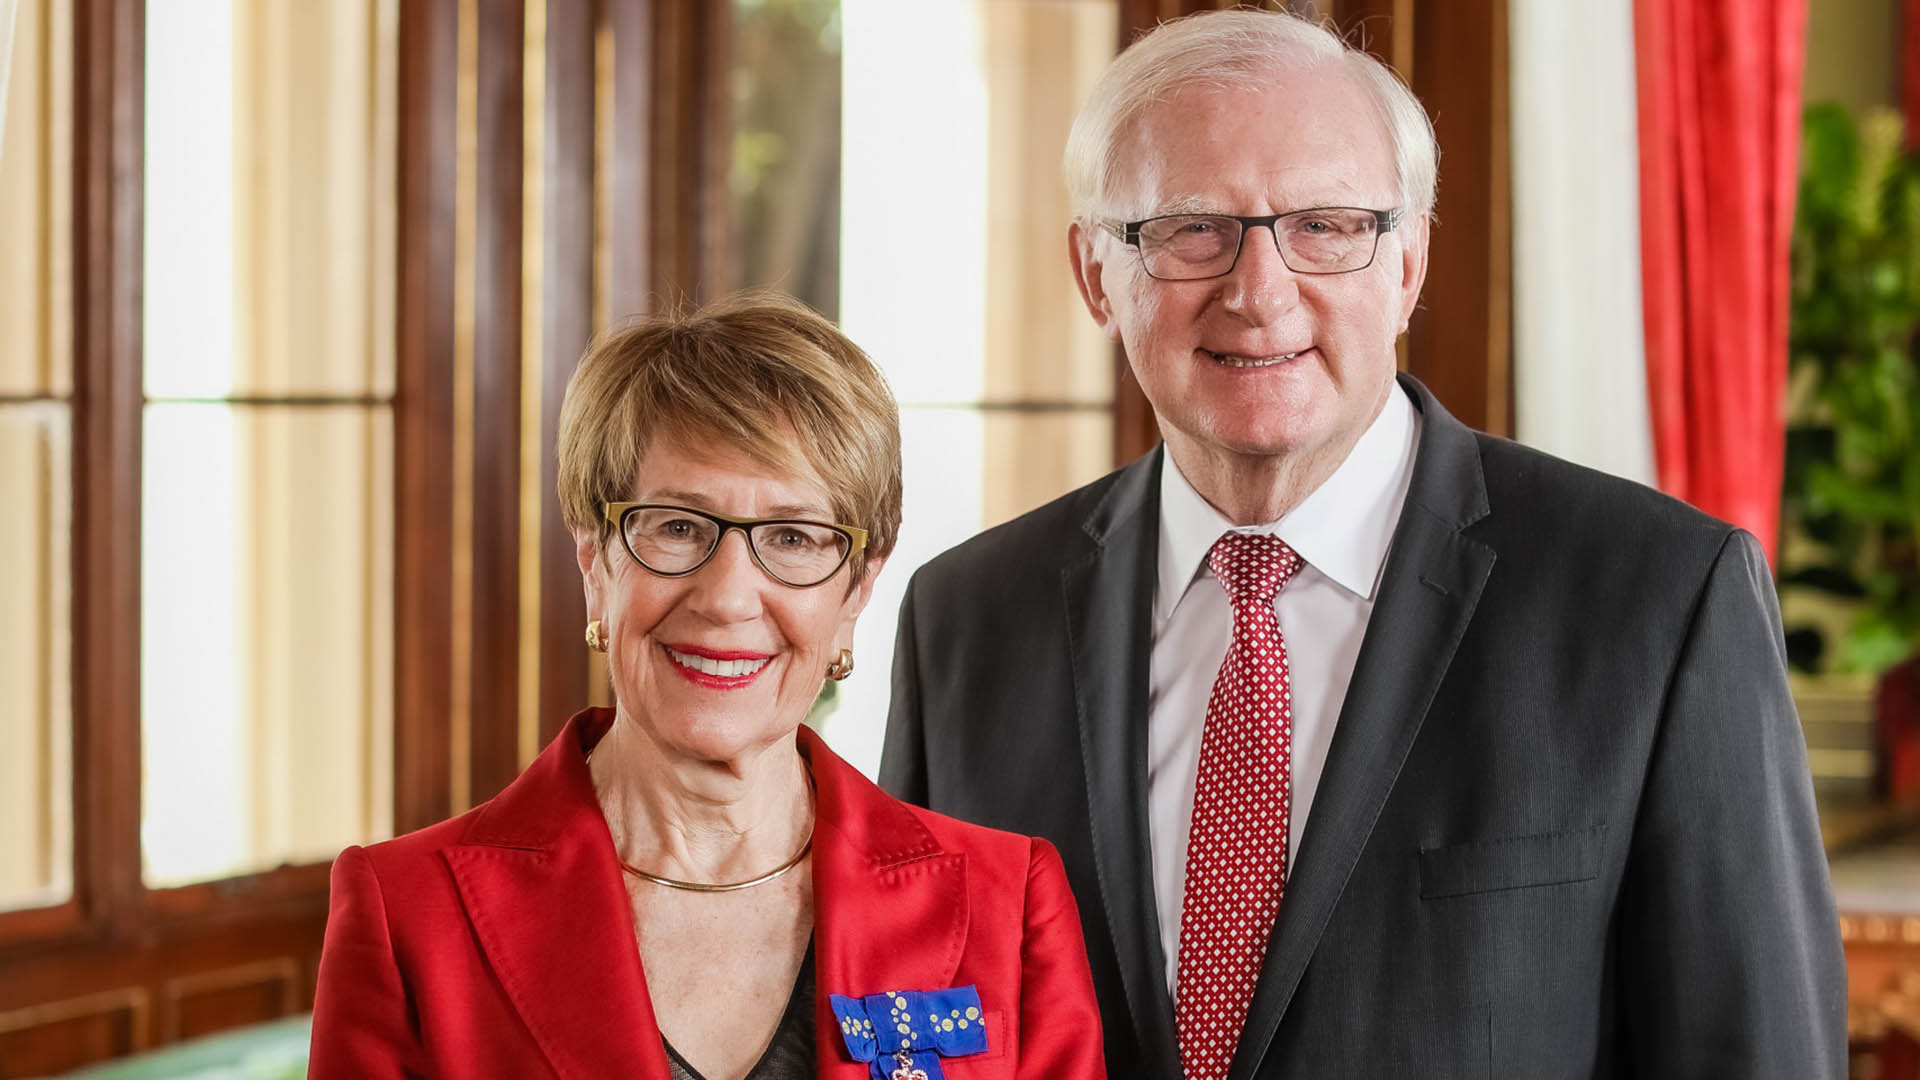 The Governor of New South Wales, Her Excellency the Honourable Margaret Beazley AC QC, and her husband, Mr Dennis Wilson